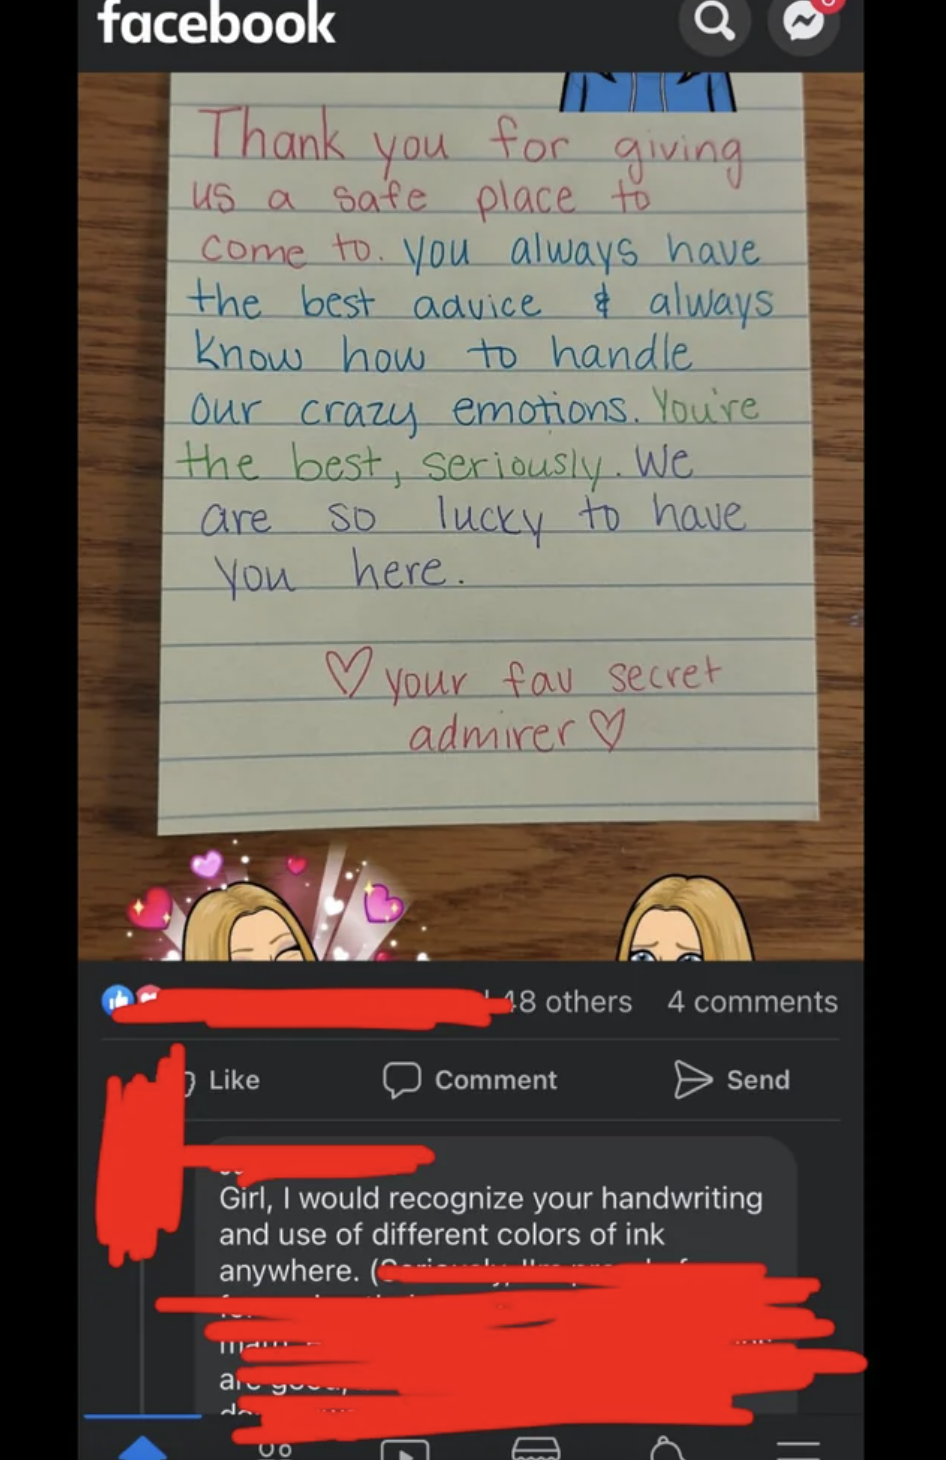 Handwritten thank you note with emojis and likes visible, text content is appreciative. Comments include a handwriting compliment